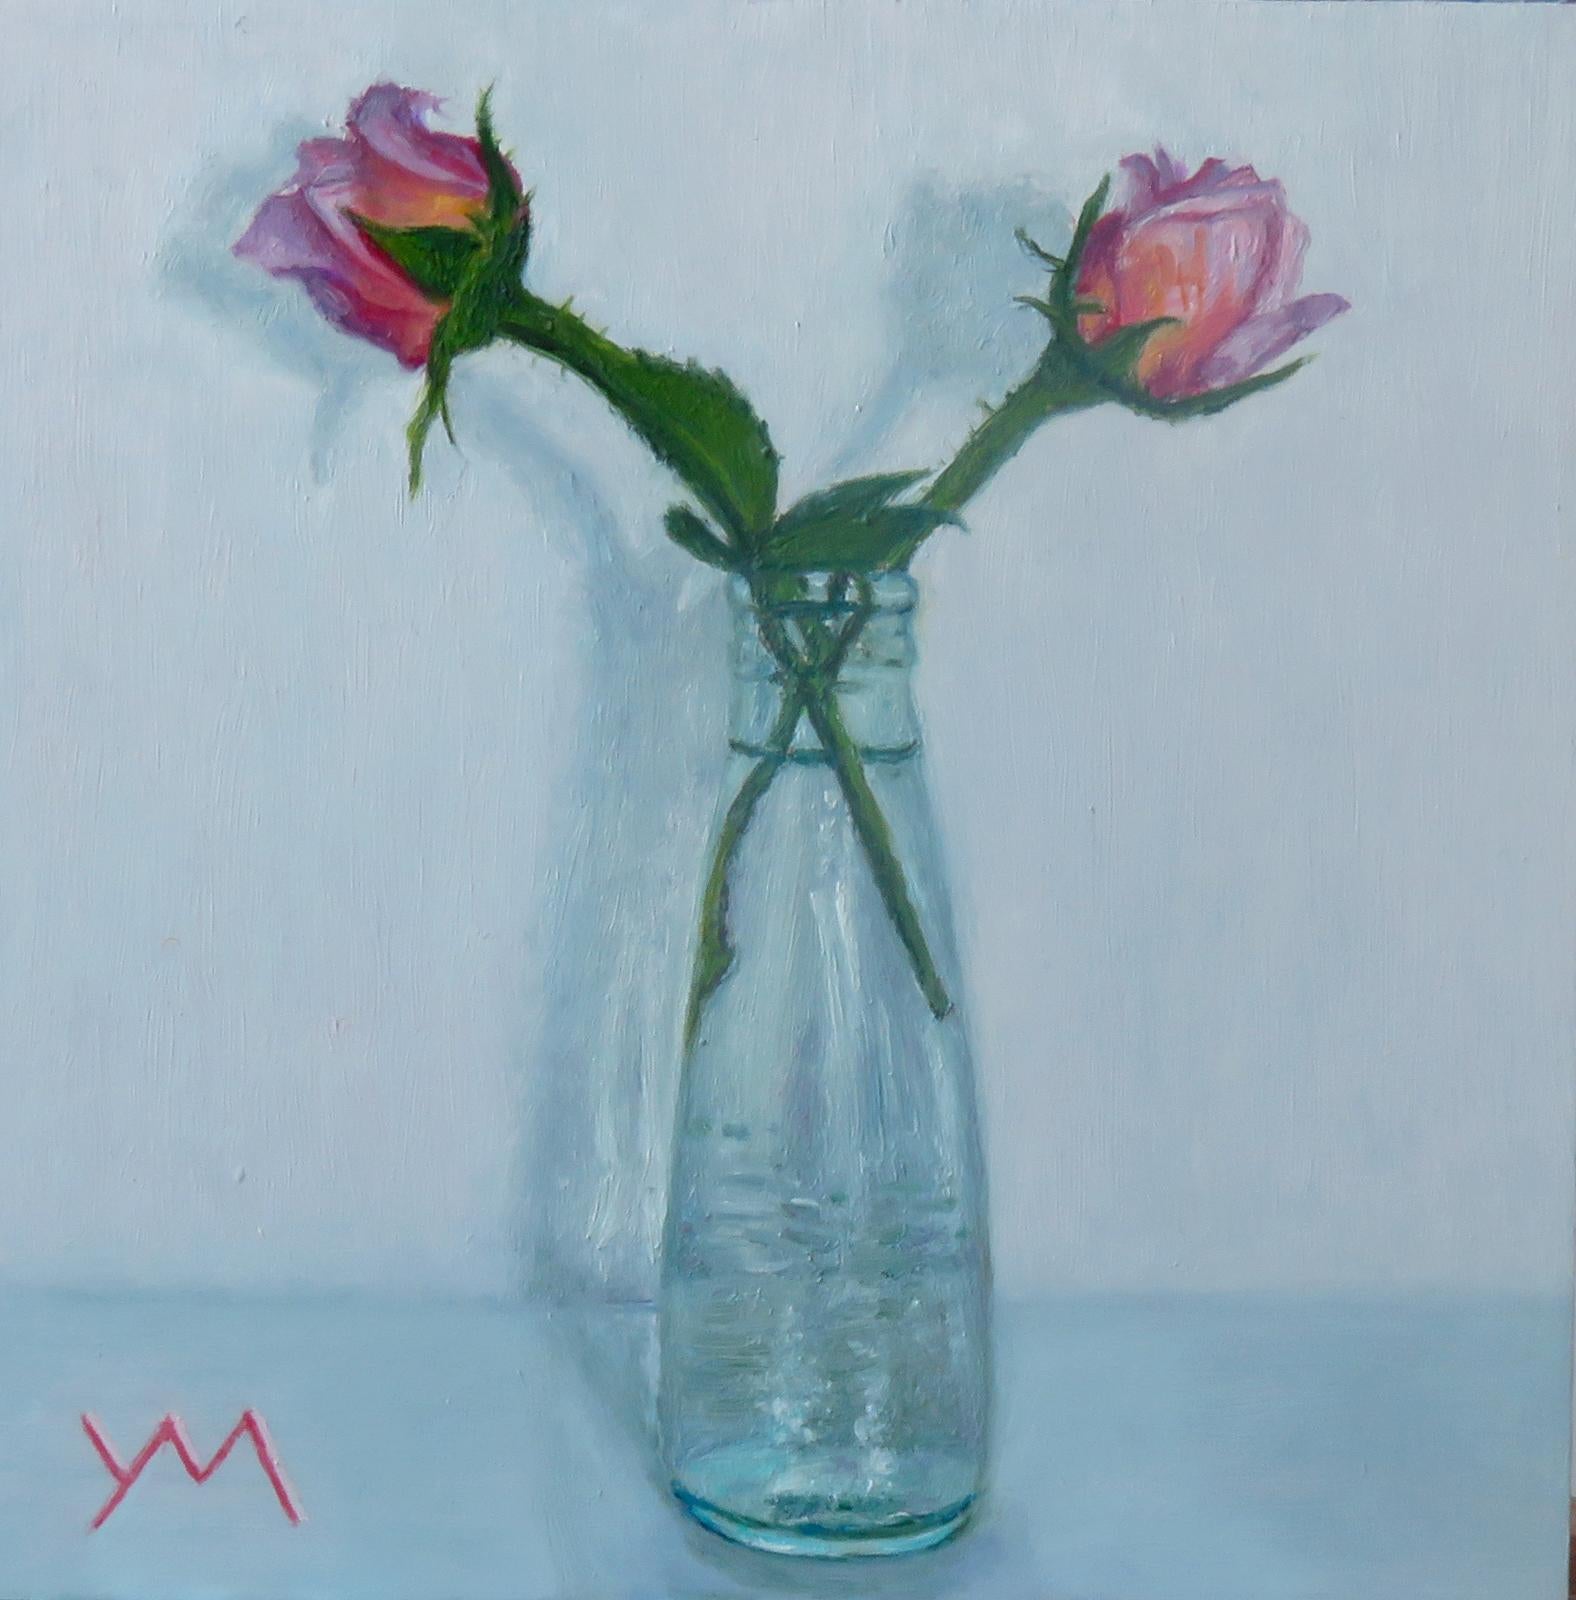 Yvonne Melchers Figurative Painting - "Last Rose Buds From My Garden, " Still Life Oil Painting